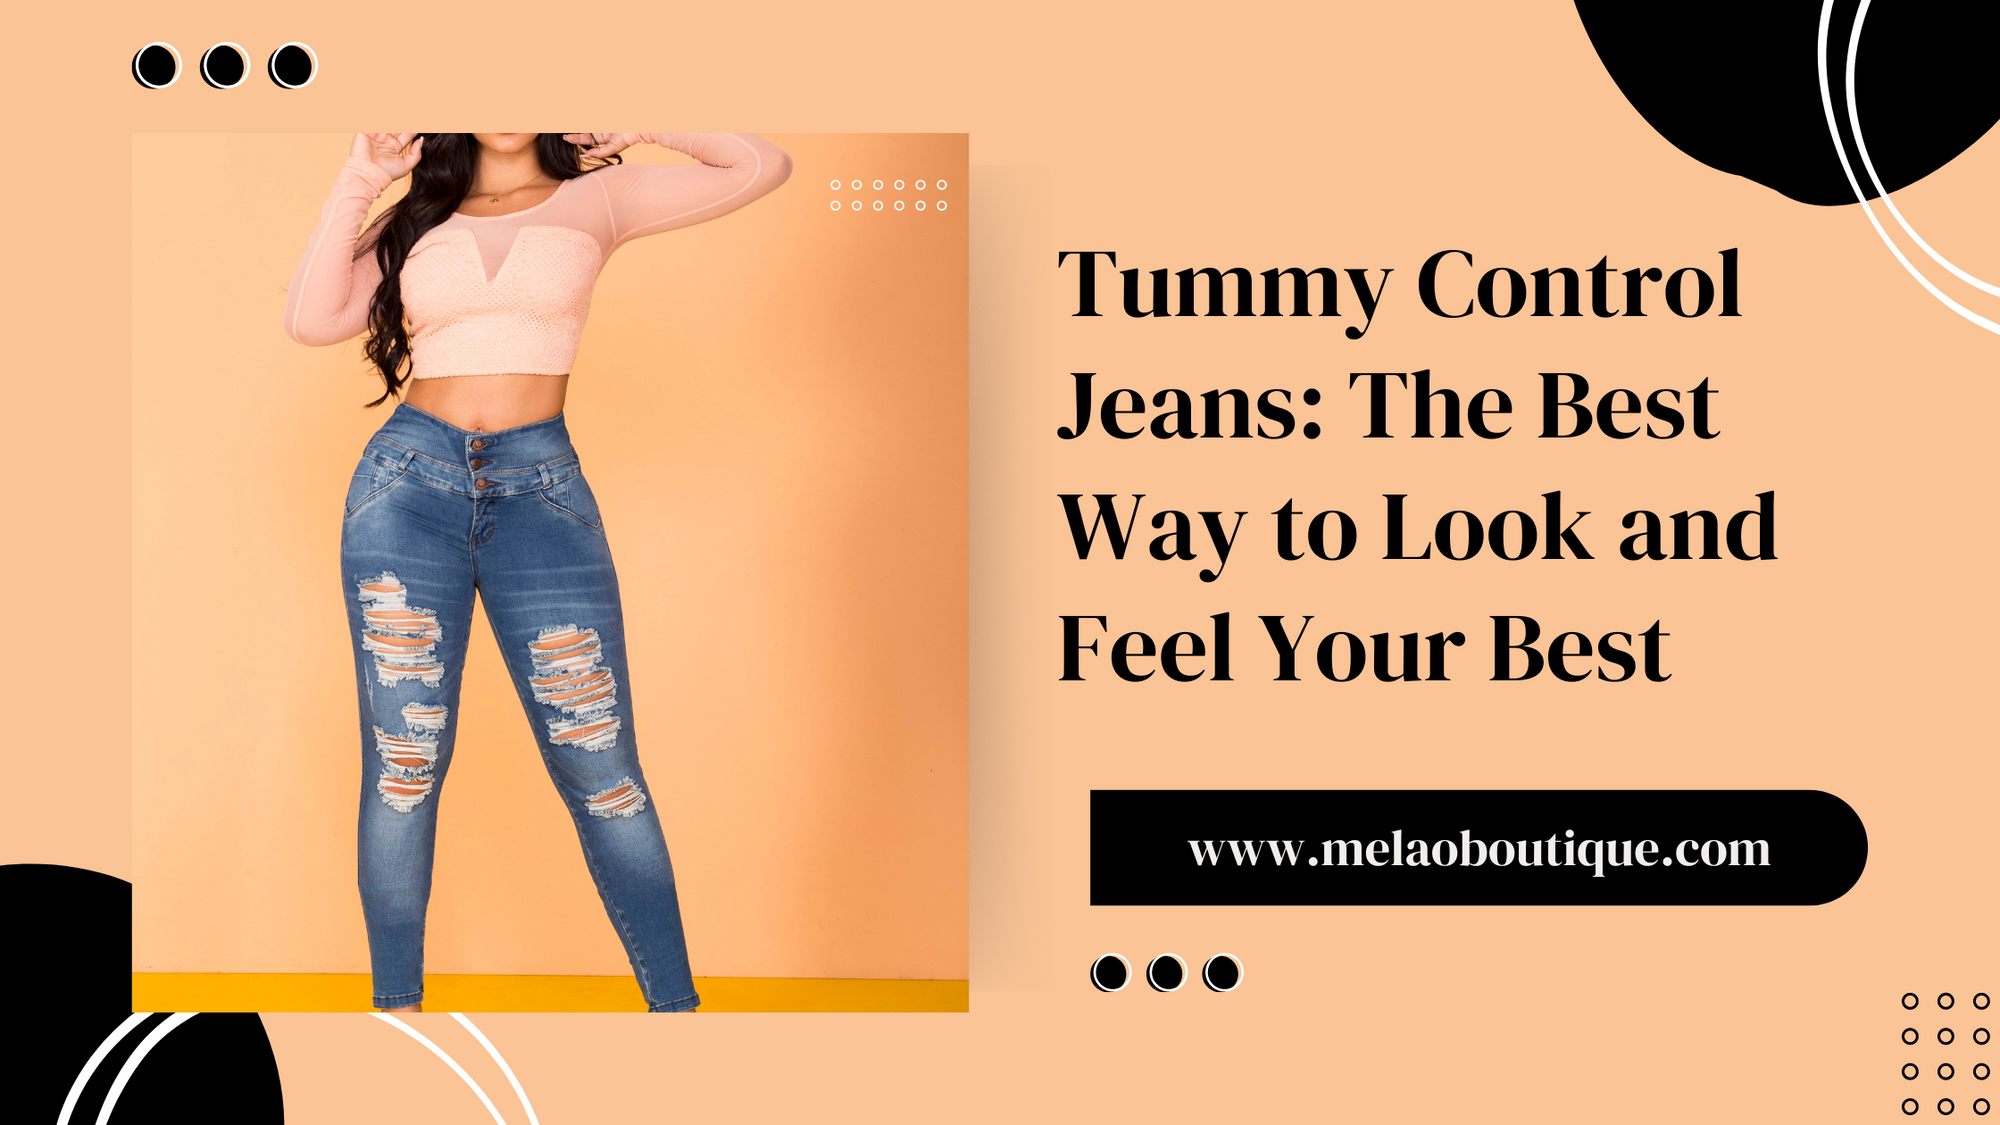 Tummy Control Jeans The Best Way to Look and Feel Your Best